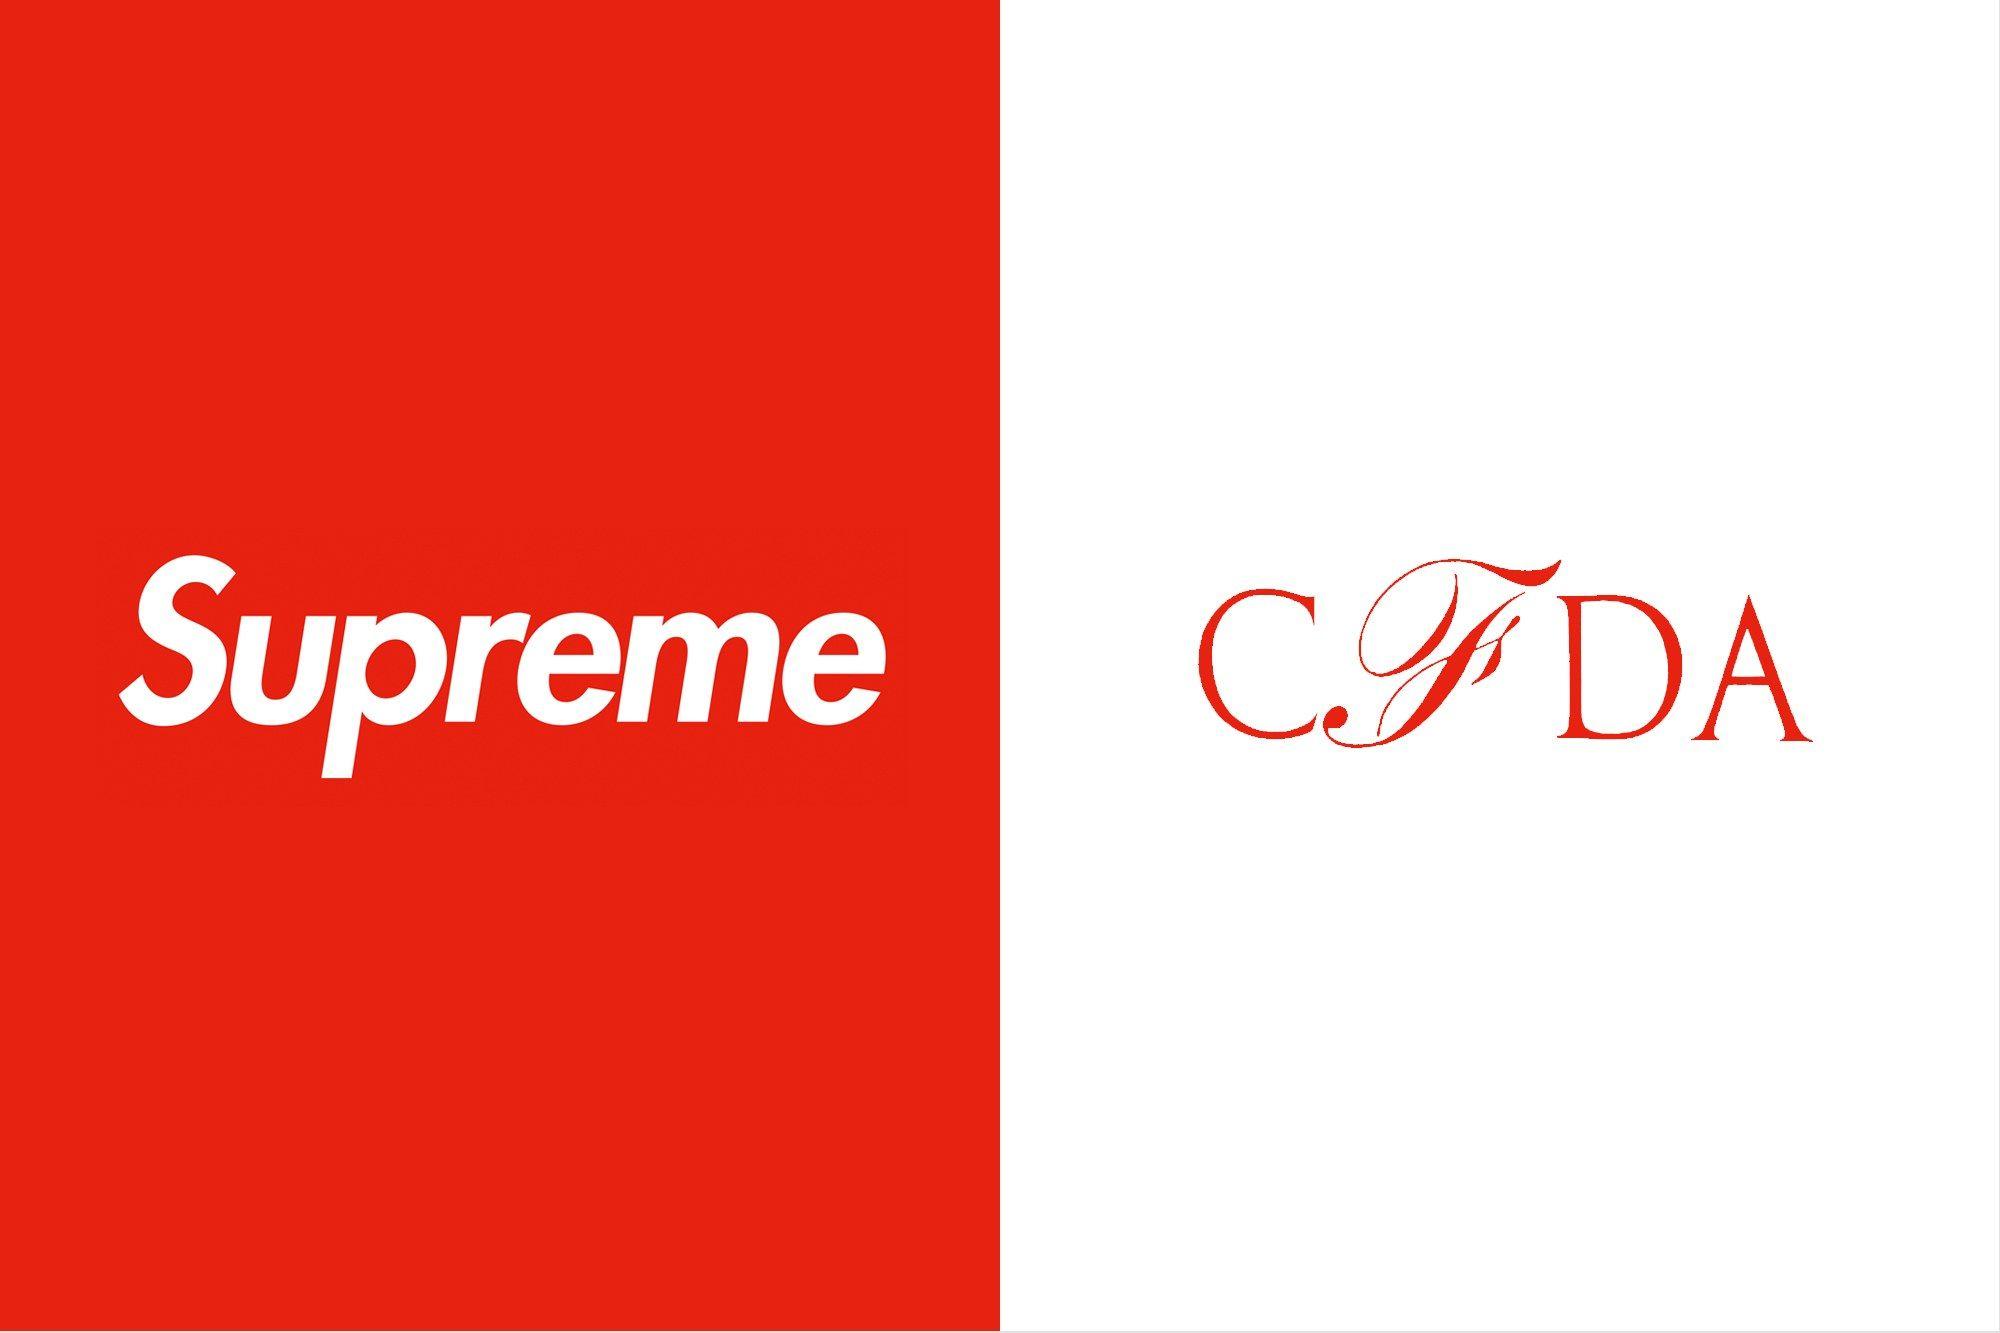 CFDA Logo - Supreme Is Nominated for American Fashion's Biggest Award